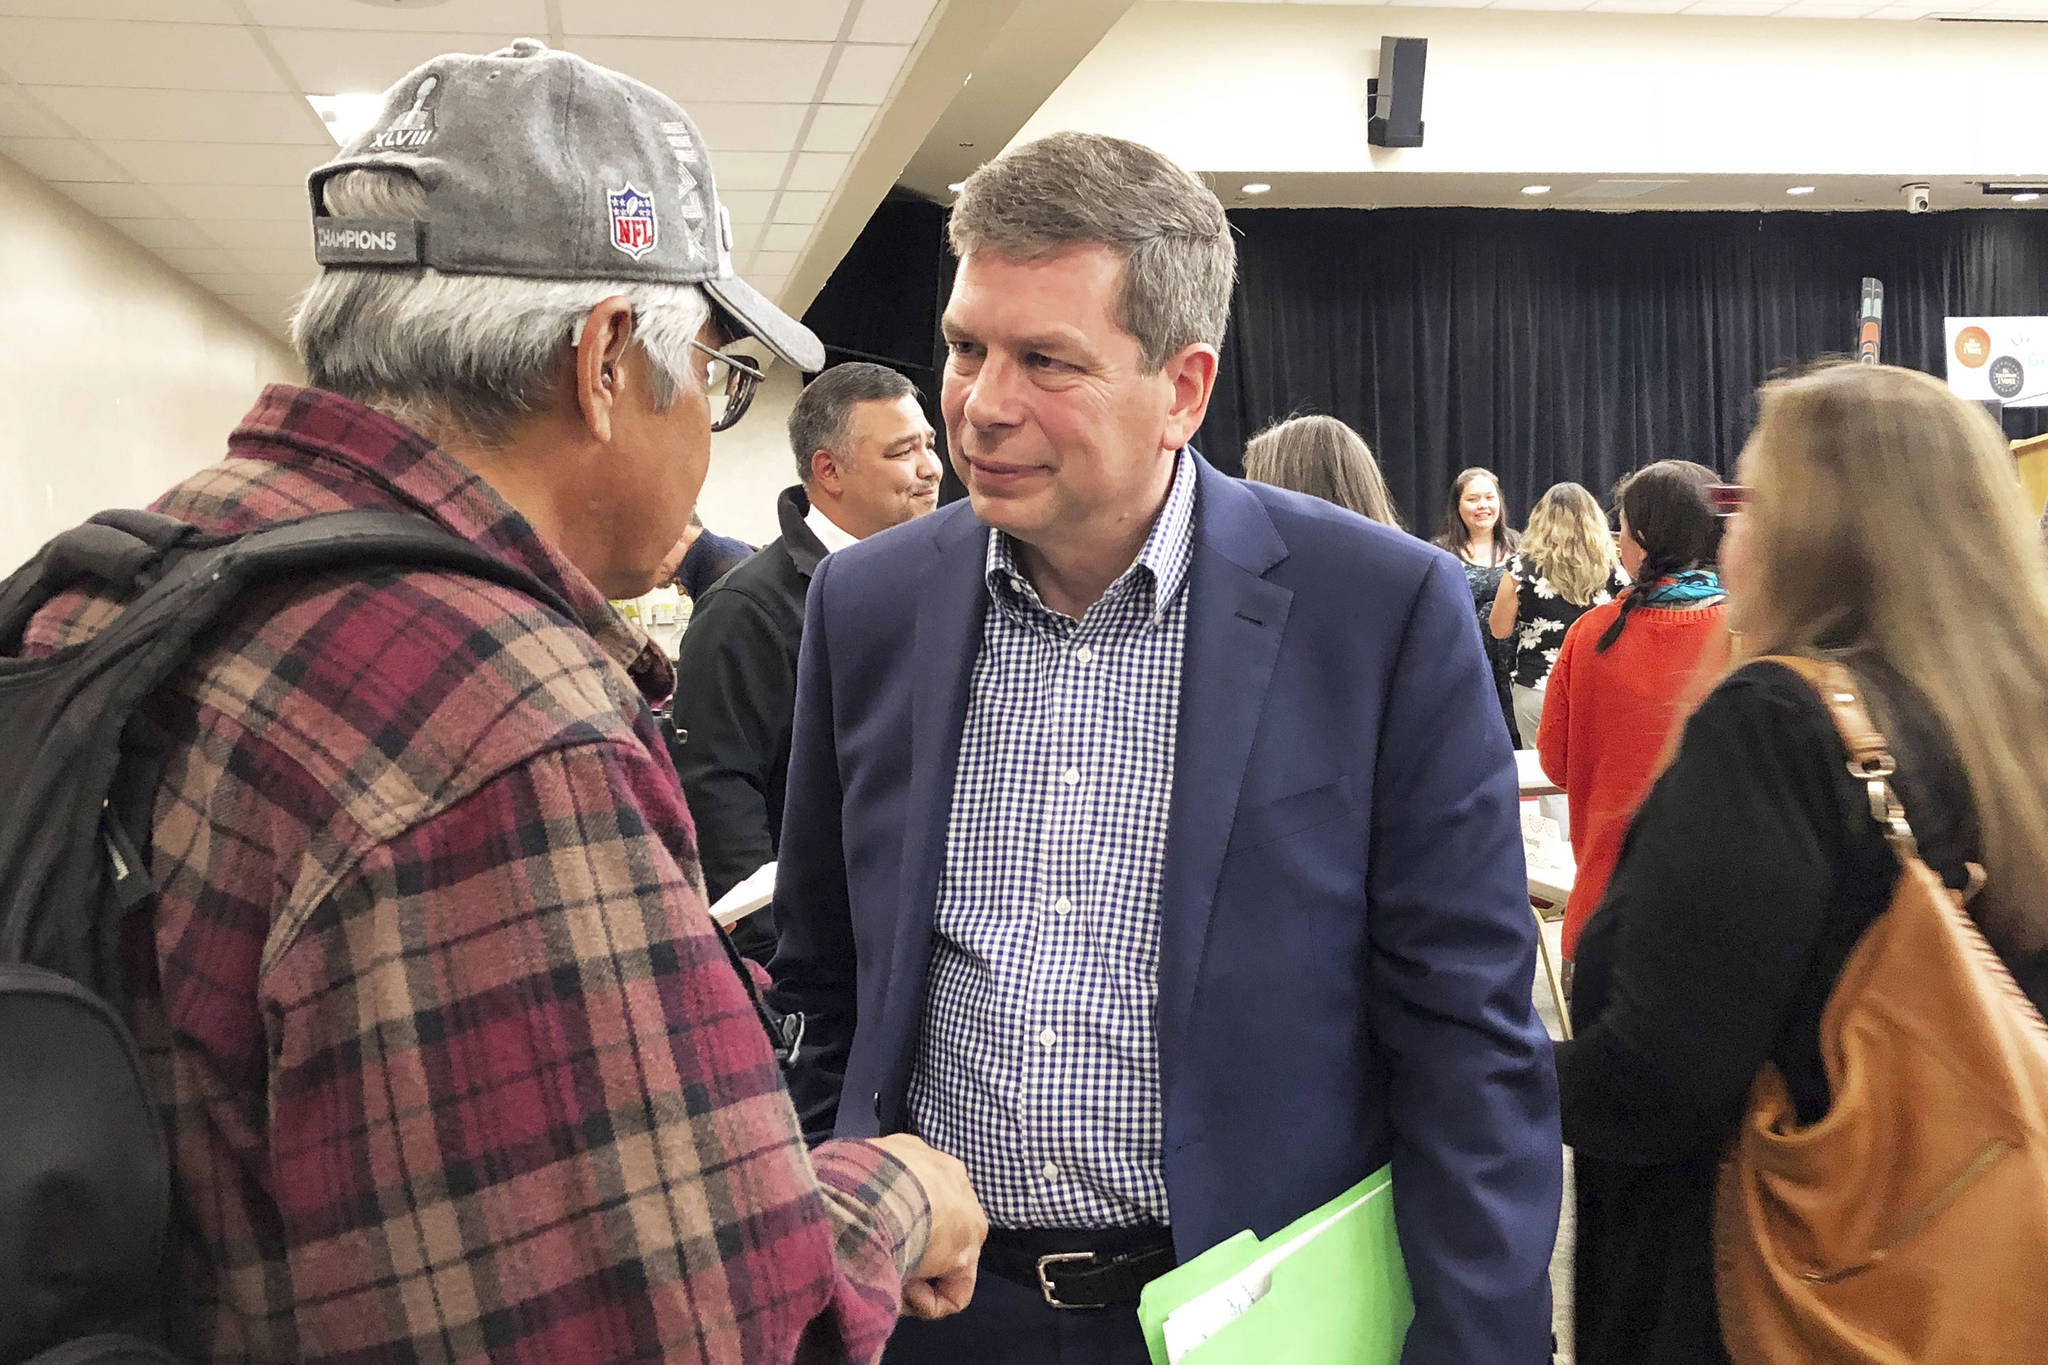 A discussion with gubernatorial candidate Mark Begich